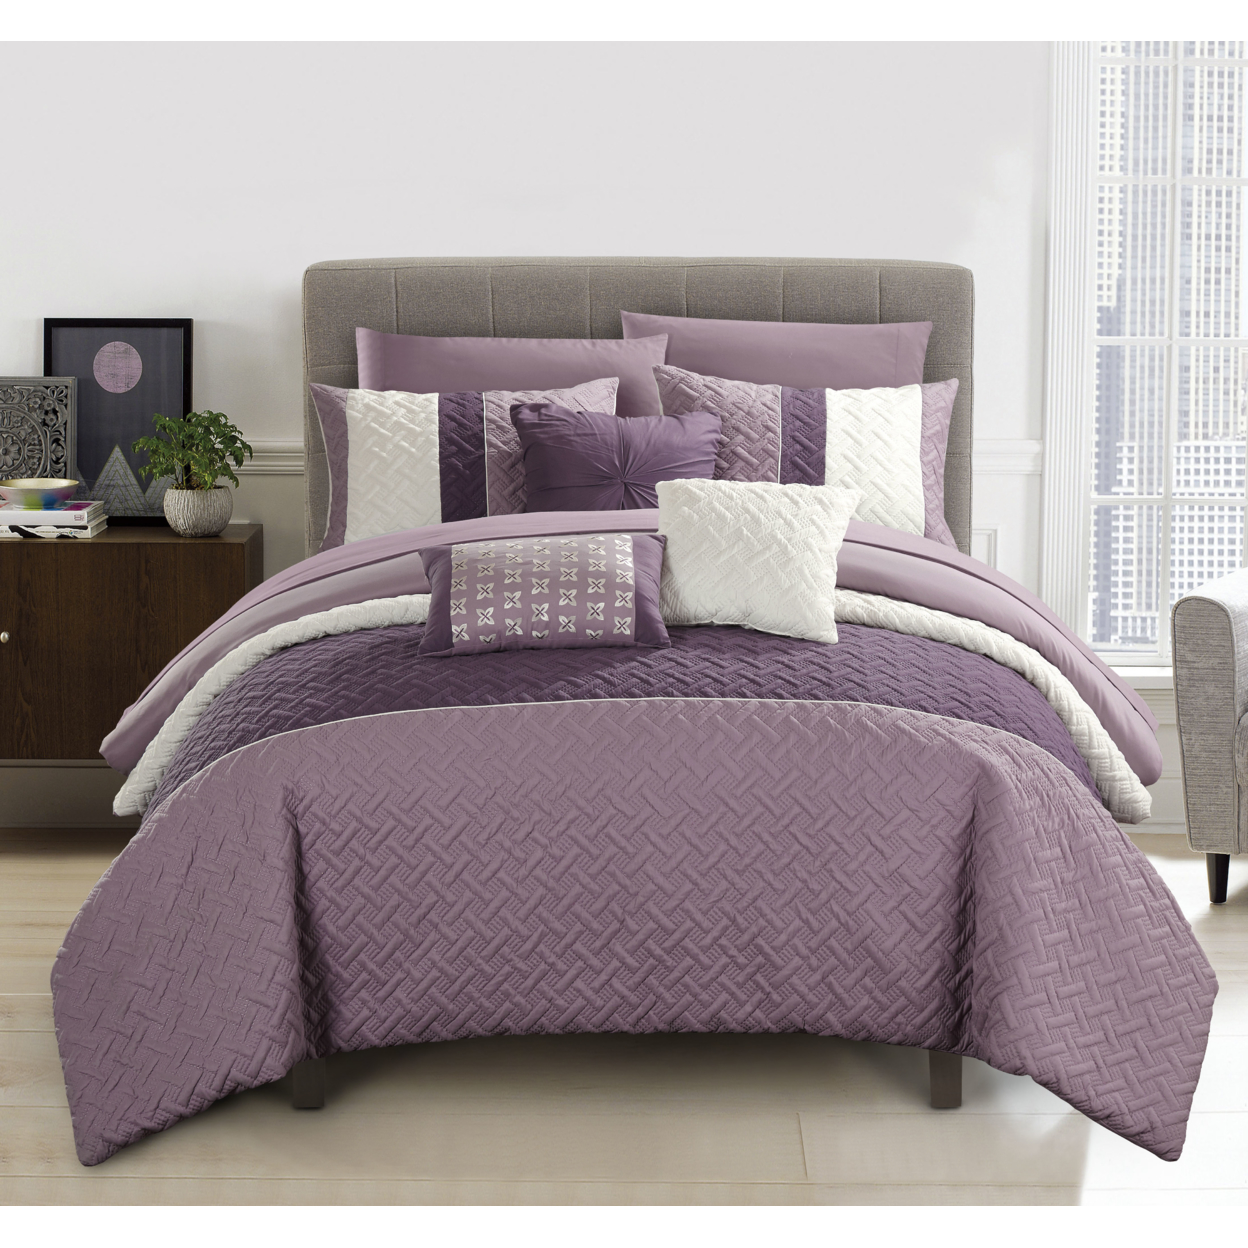 Chic Home Shaila 10 Or 8 Piece Comforter Set Color Block Quilted Embroidered Design Bed In A Bag Bedding - Plum, King